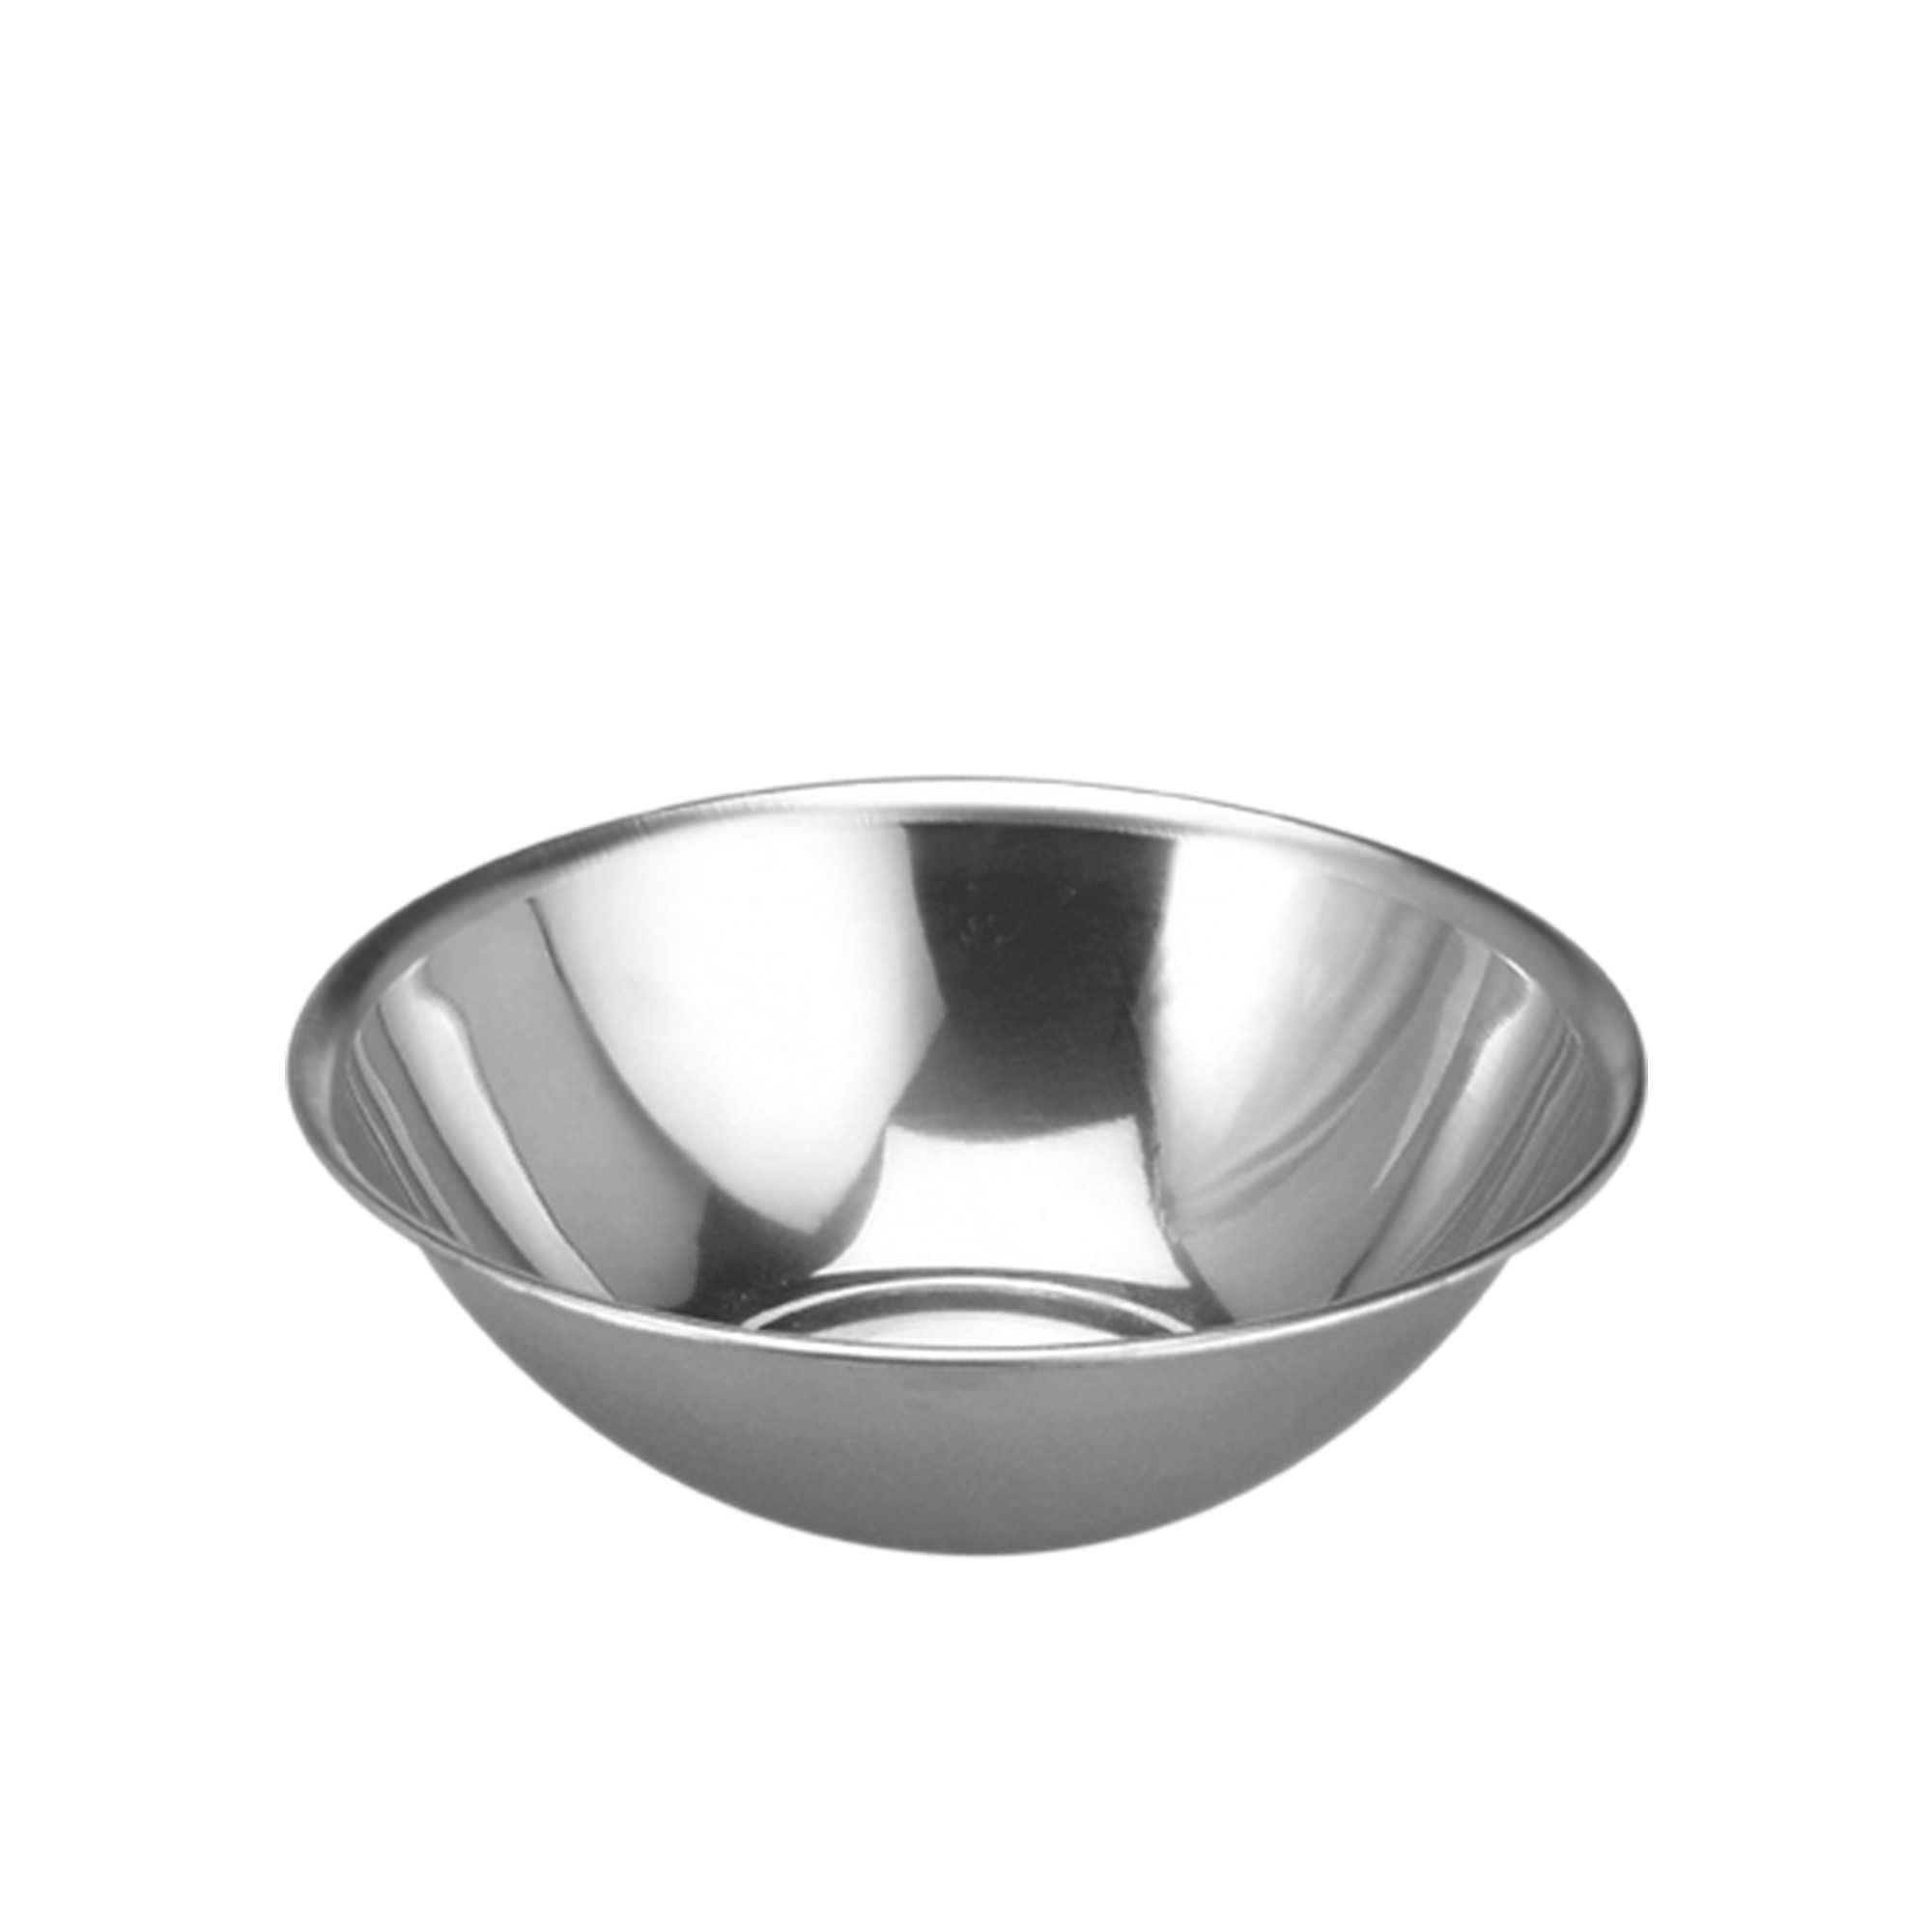 Chef Inox Stainless Steel Mixing Bowl 28cm - 3.6L Image 1